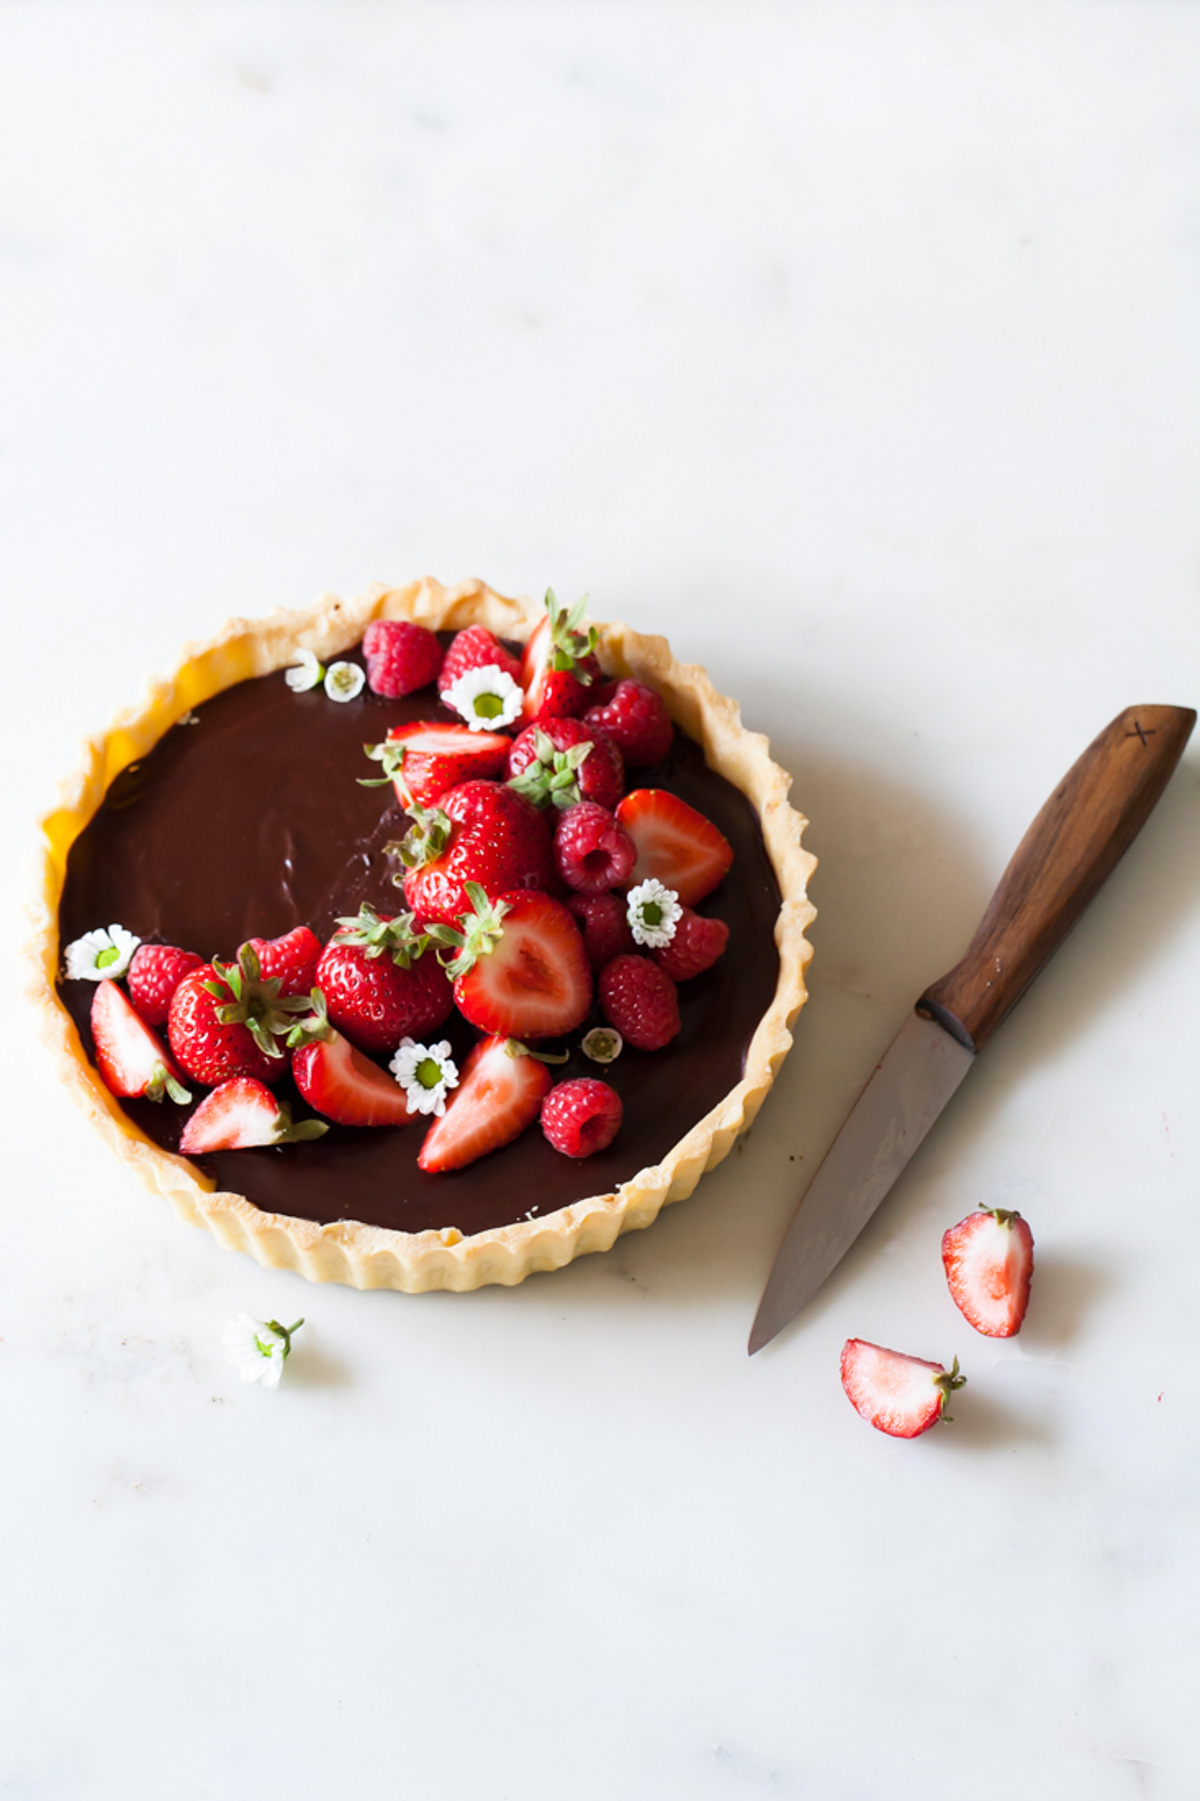 A classic chocolate tart with fresh strawberries and raspberries on top